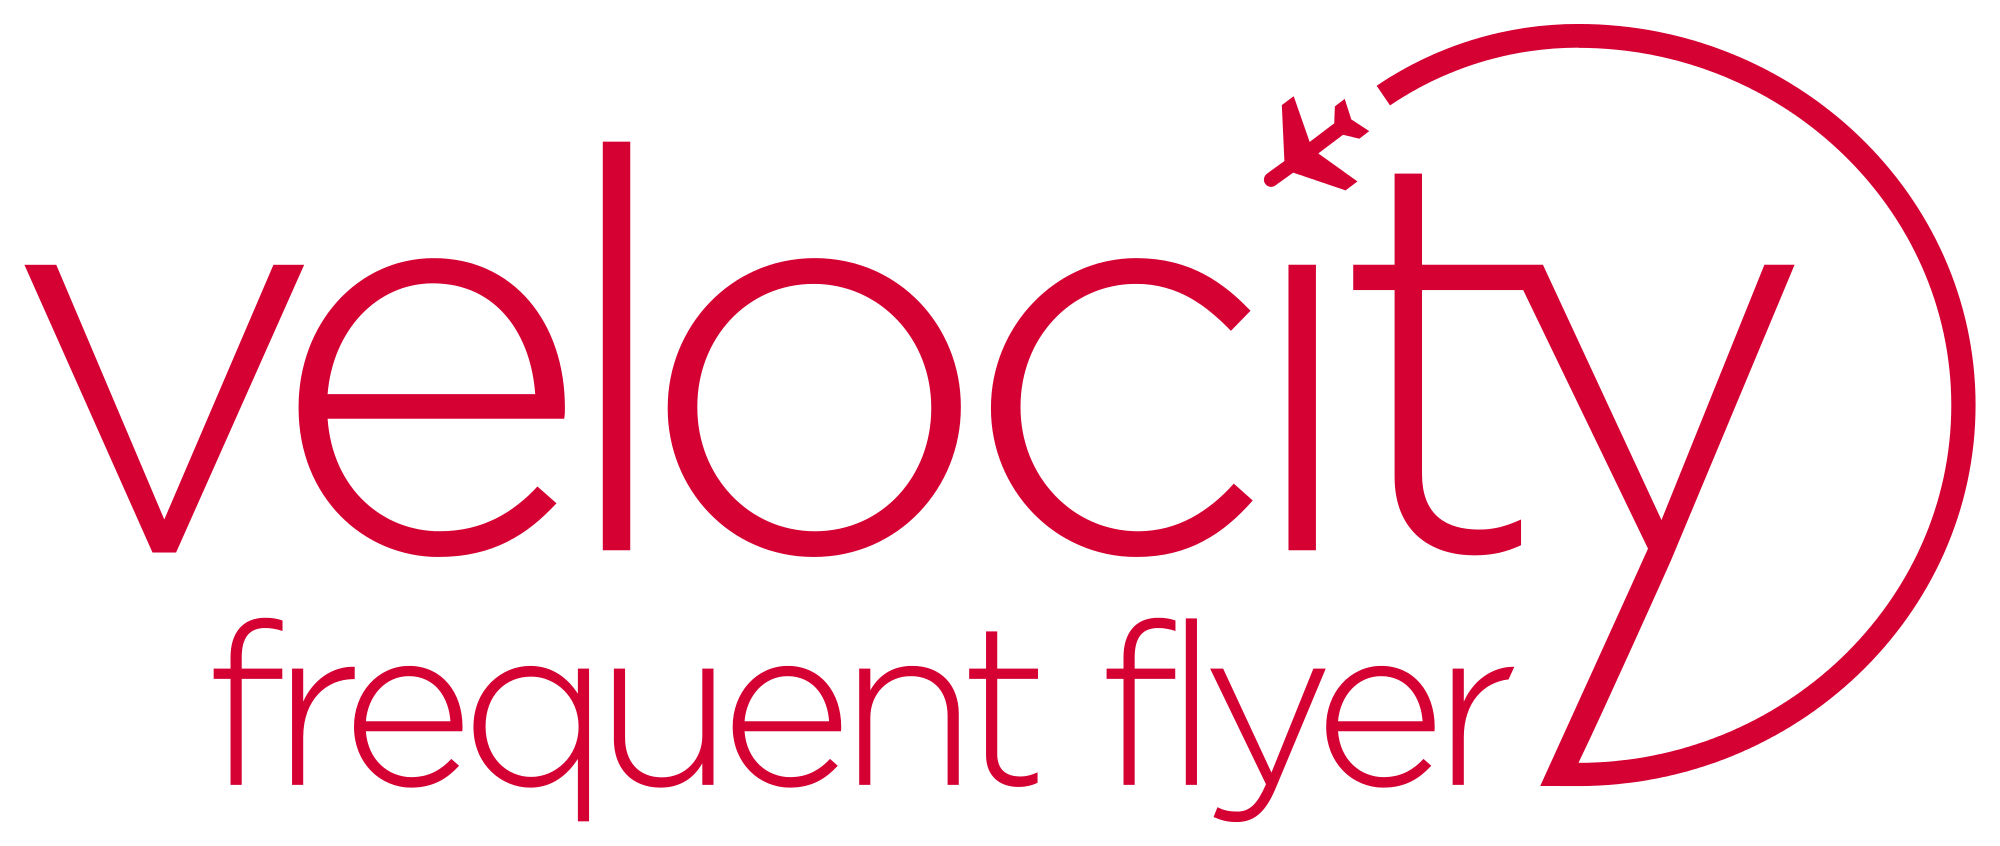 2000px-Velocity_Frequent_Flyer_logo.svg.png